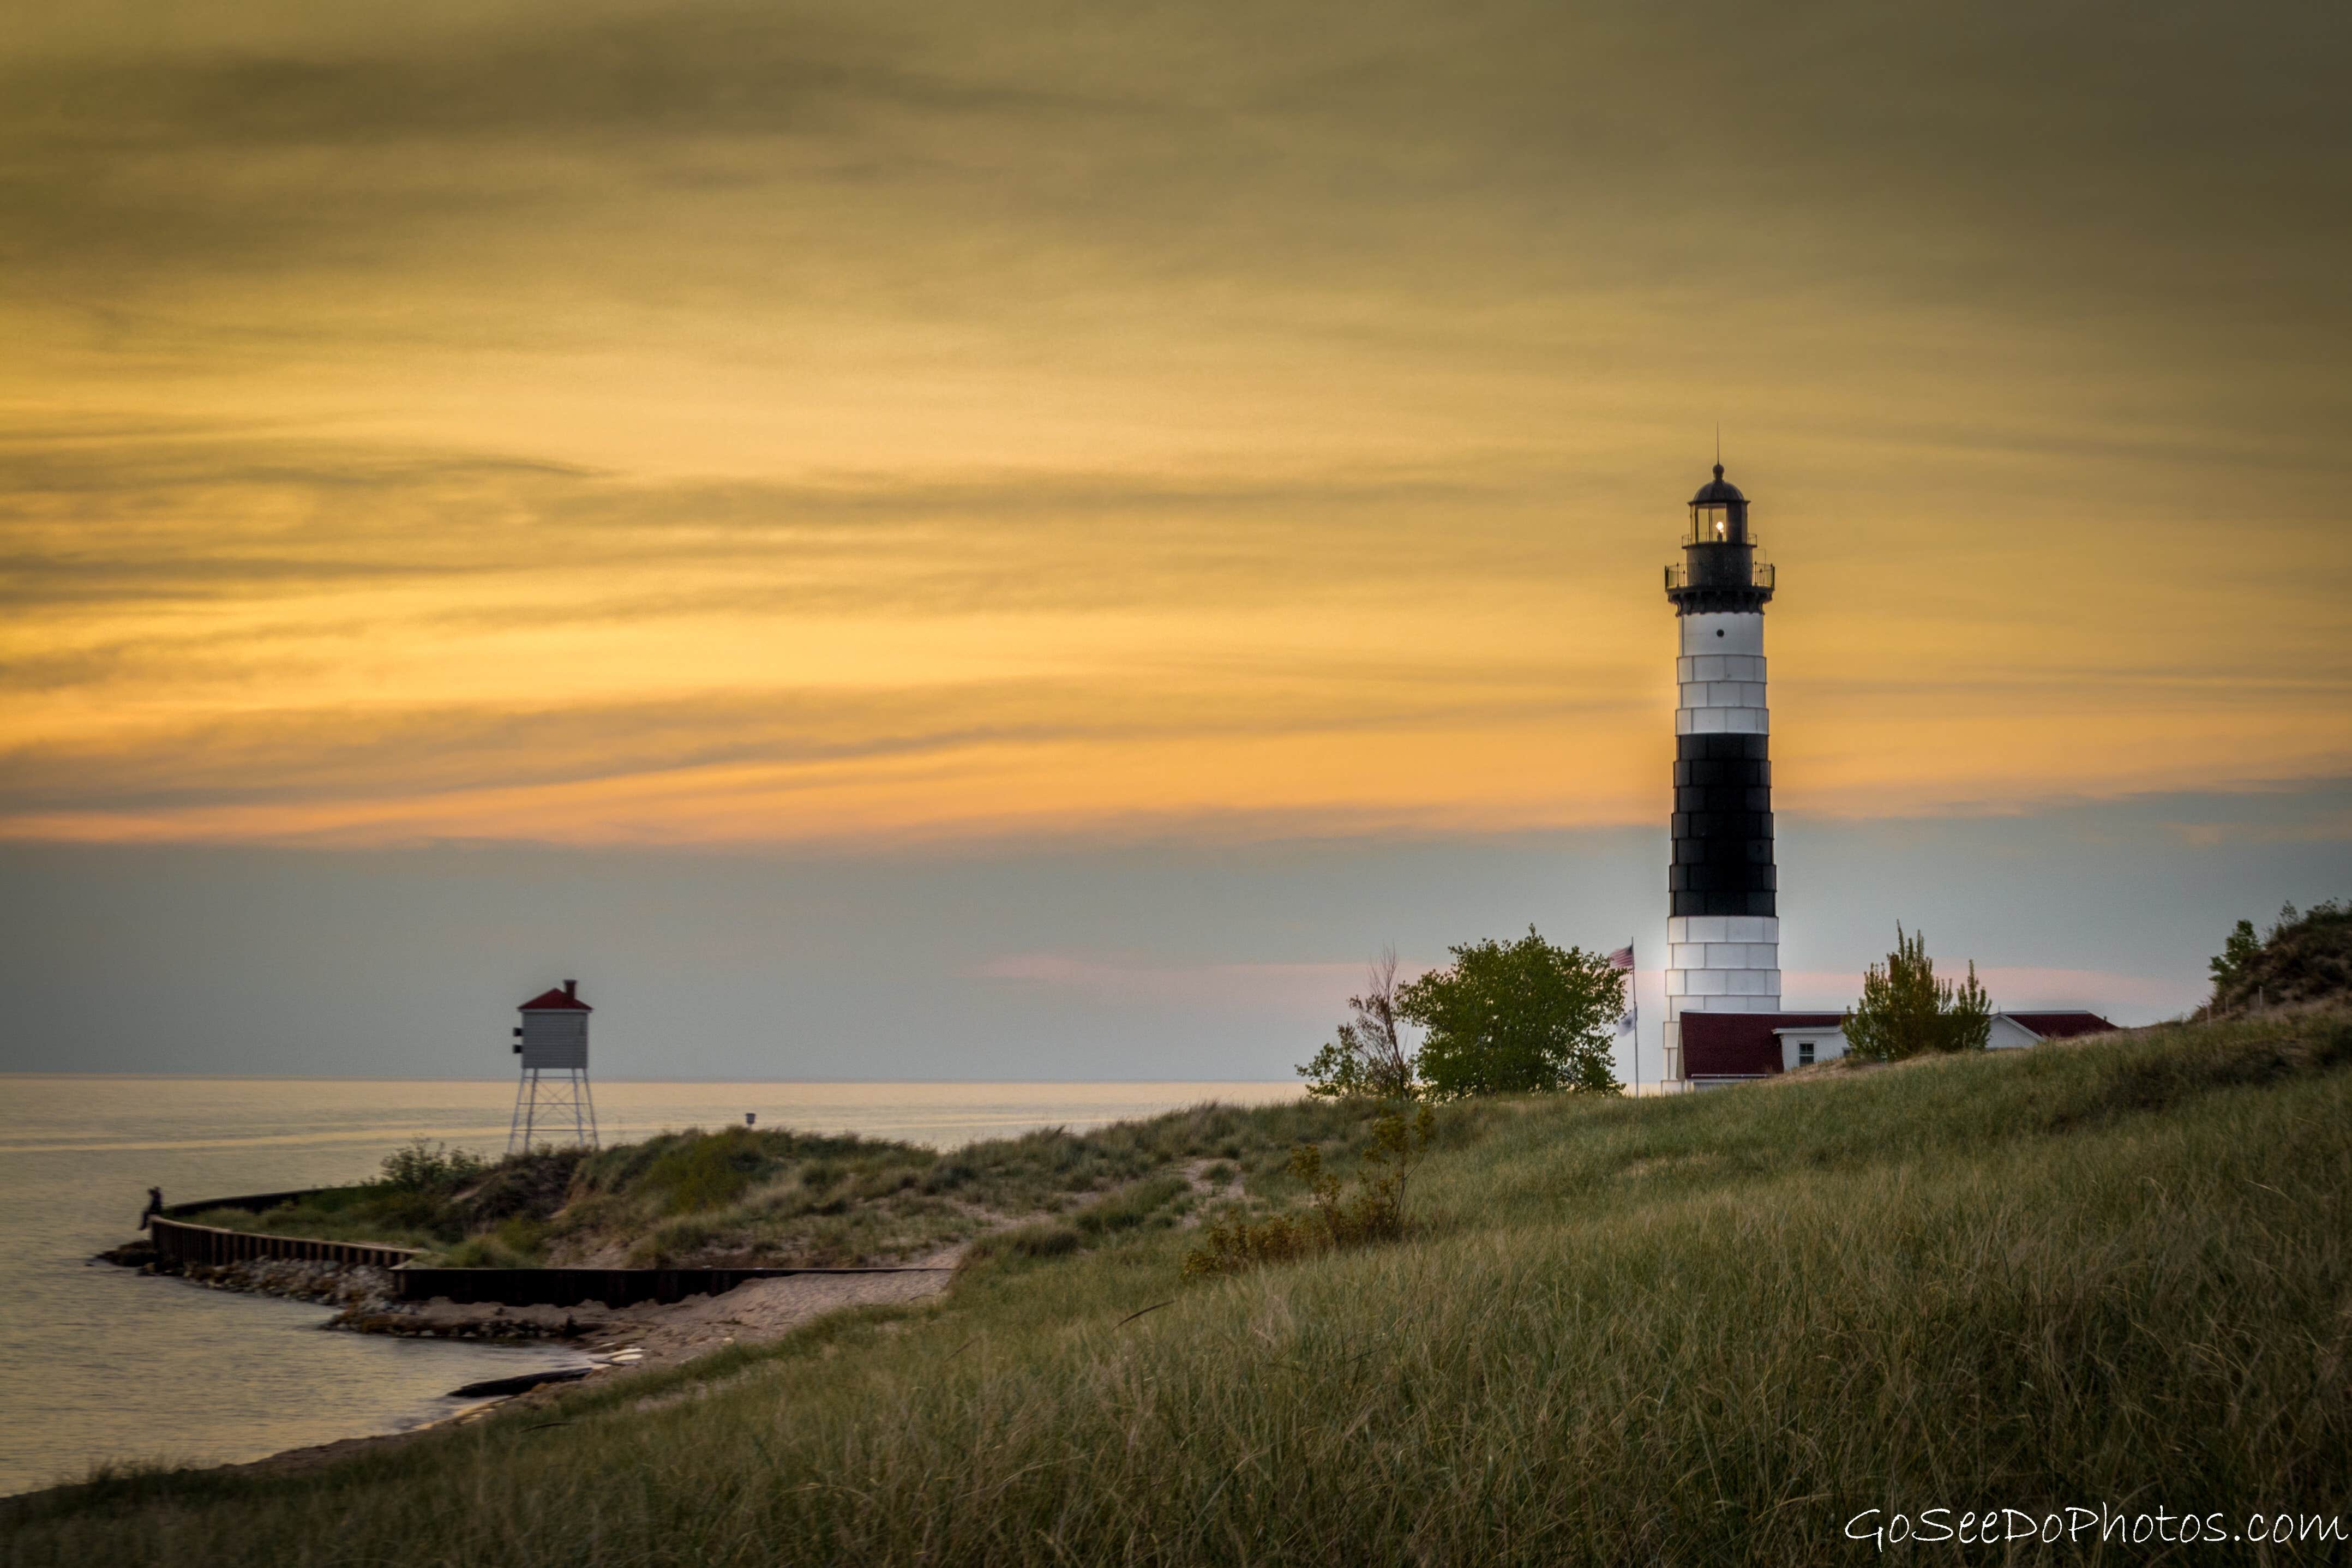 The lighthouse at sunset